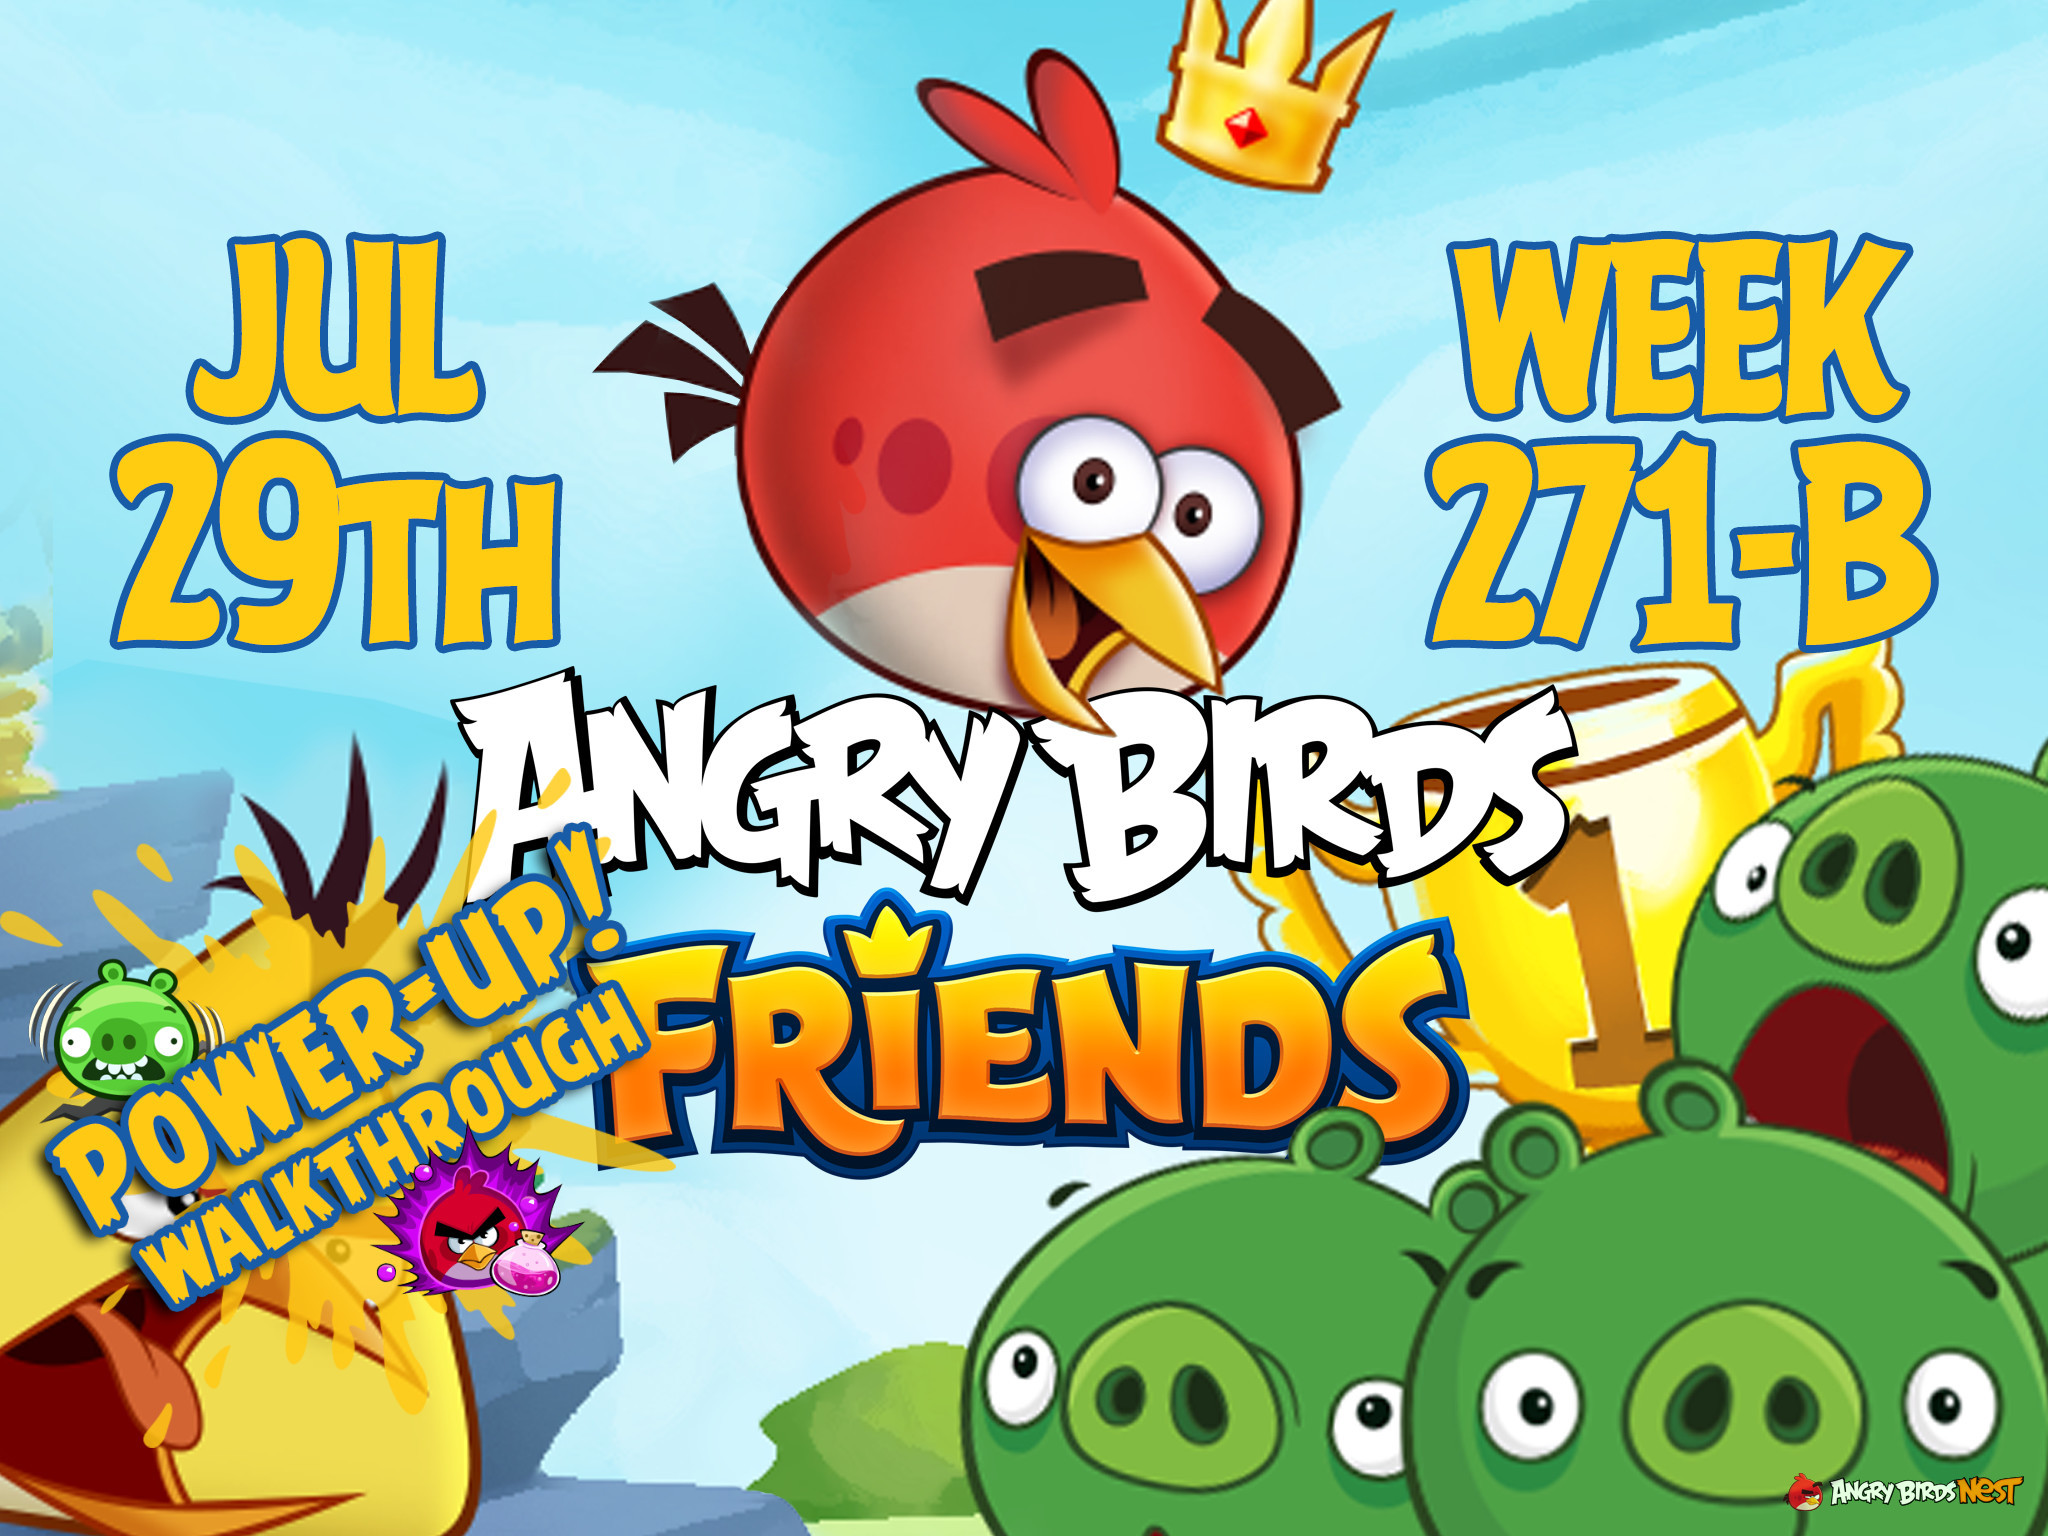 Angry Birds Friends Tournament Week 271-B Feature Image PU